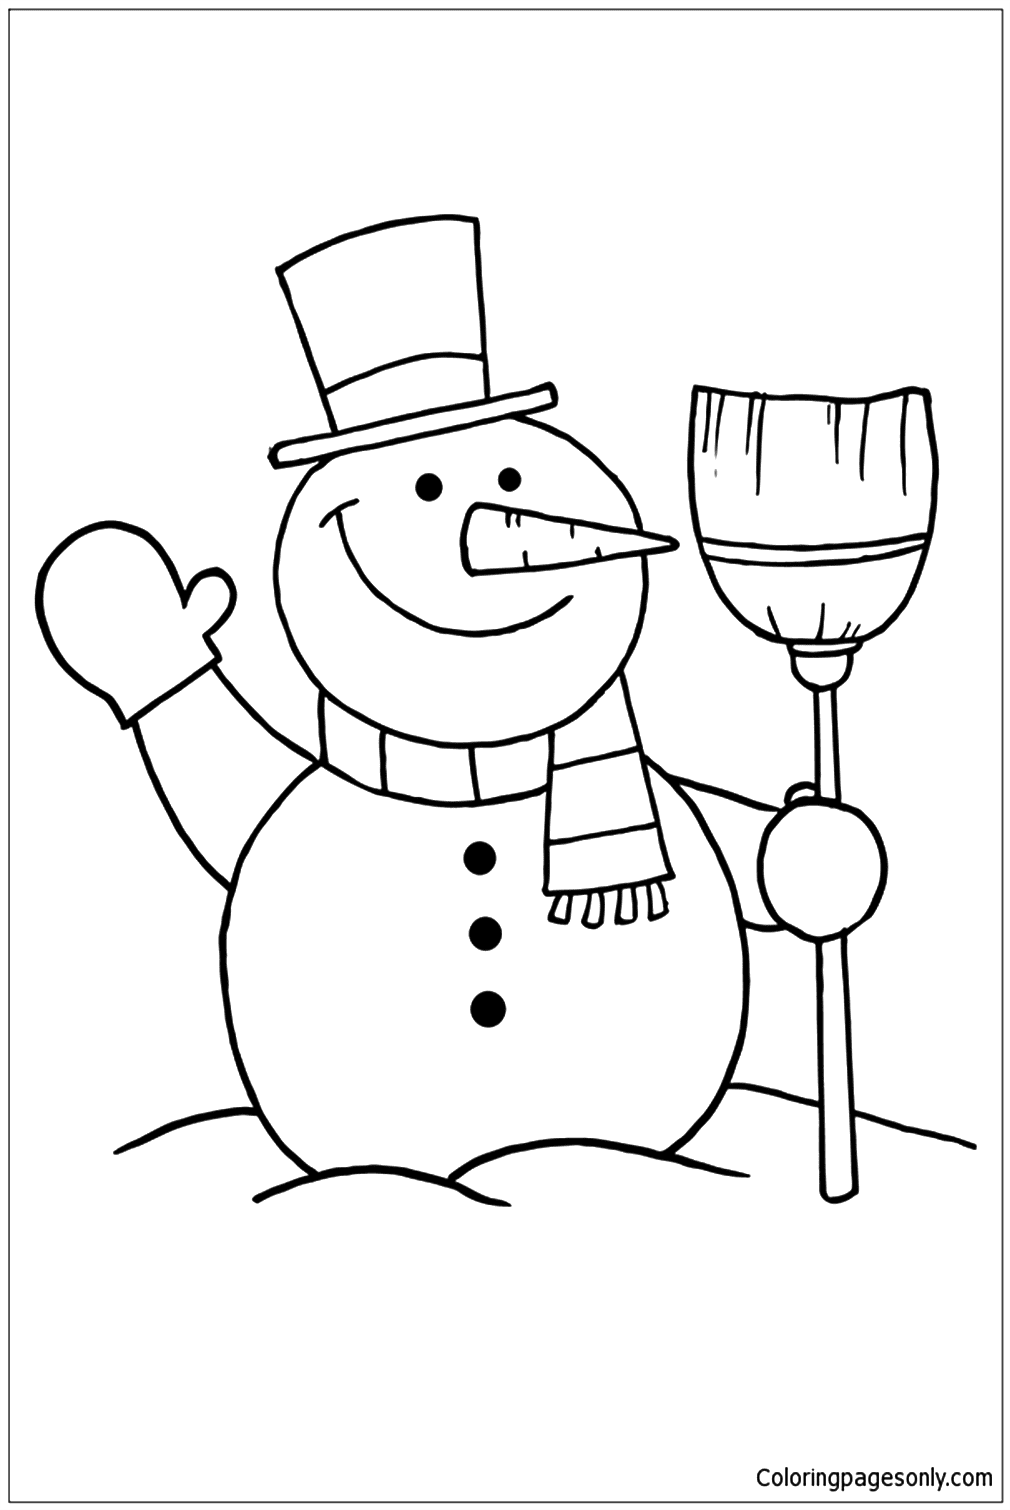 The Snowman In Winter Coloring Pages